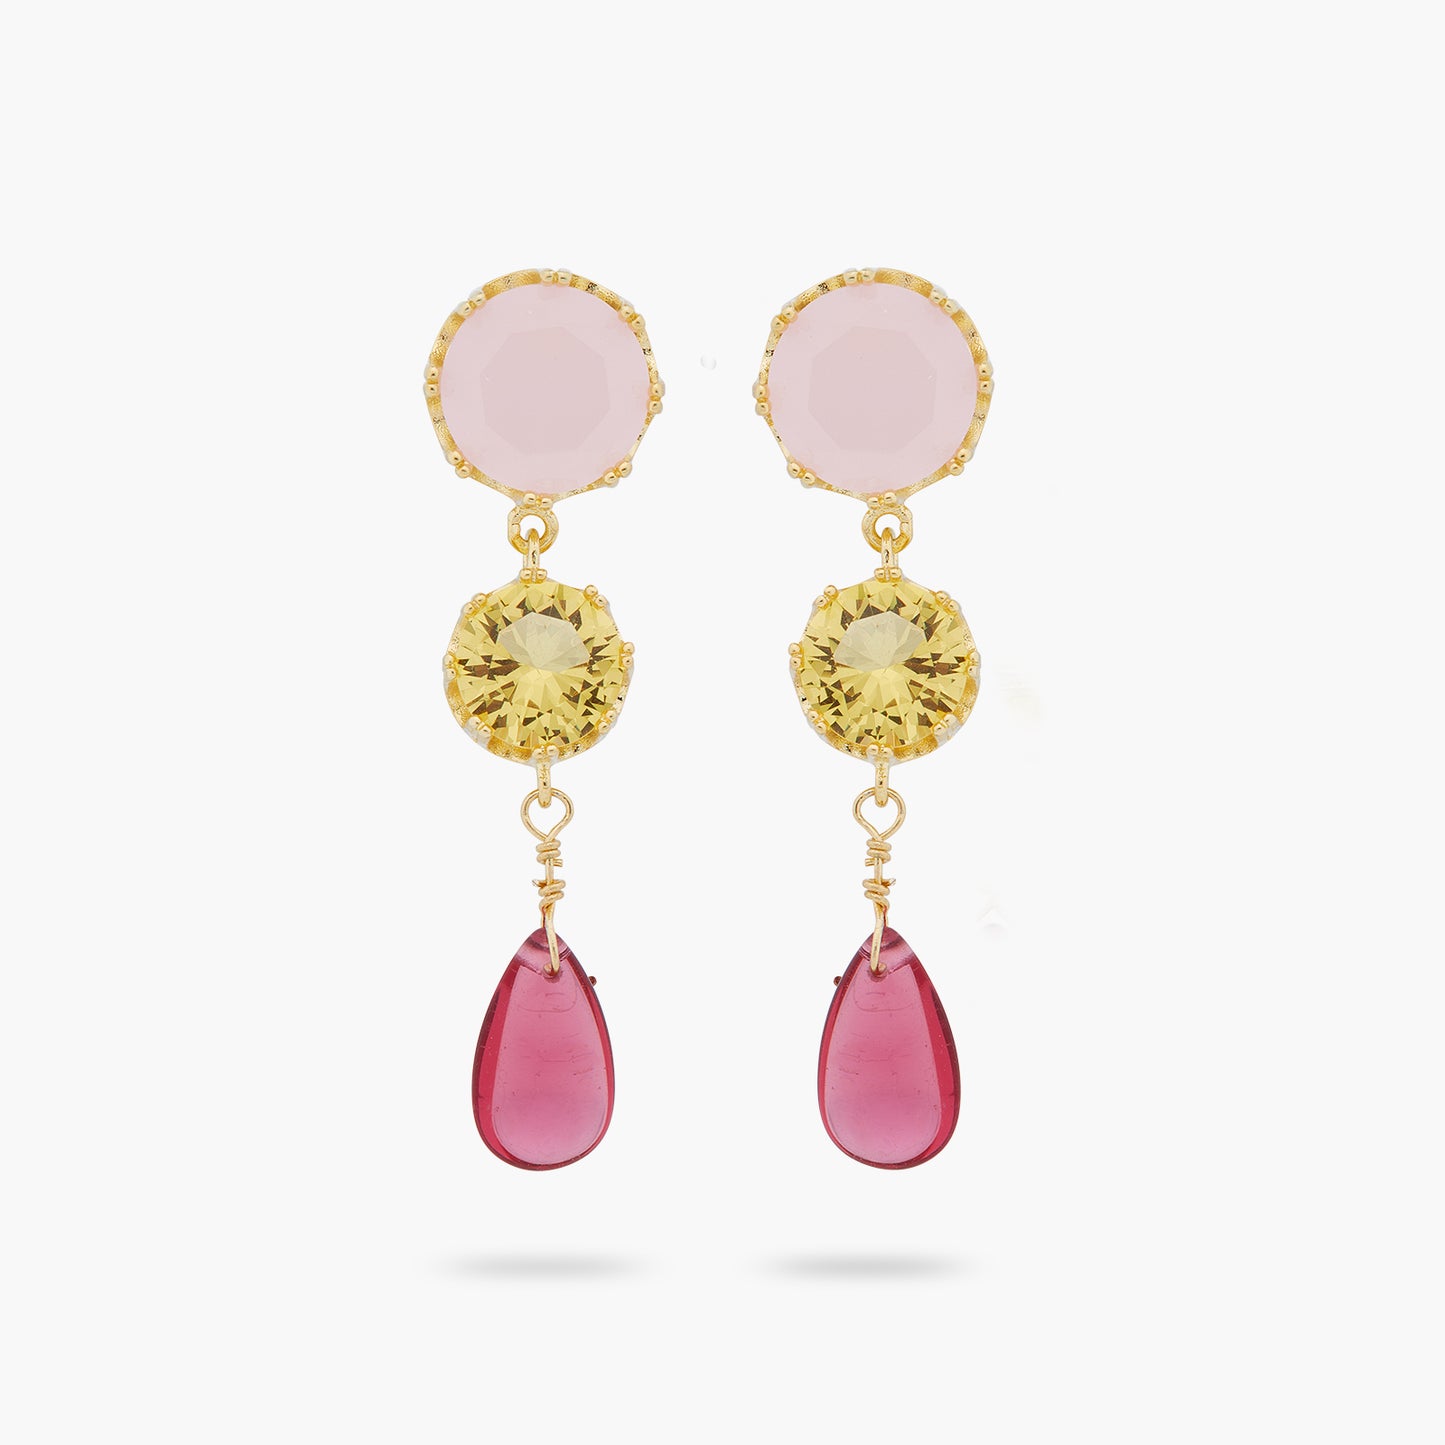 2 Round Stone And Bead Earrings | ARCL1071